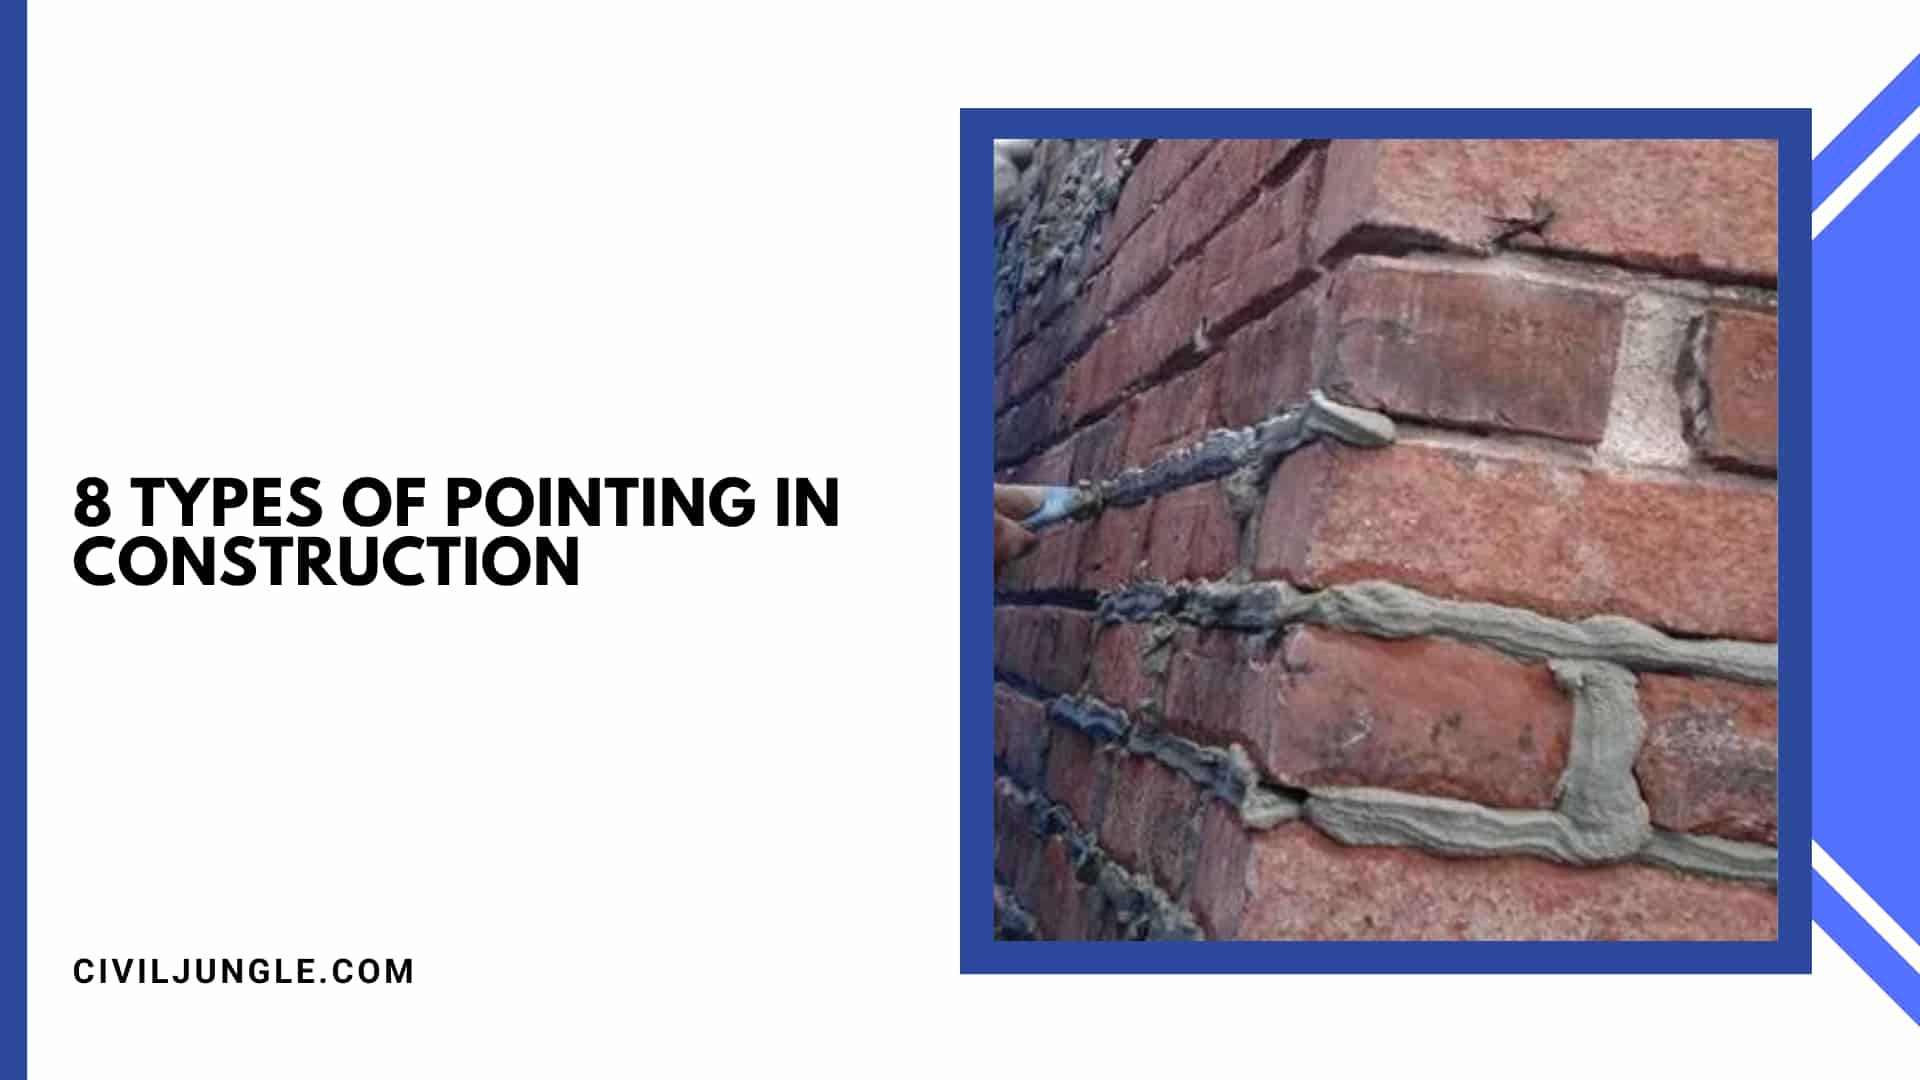 8 Types of Pointing in Construction